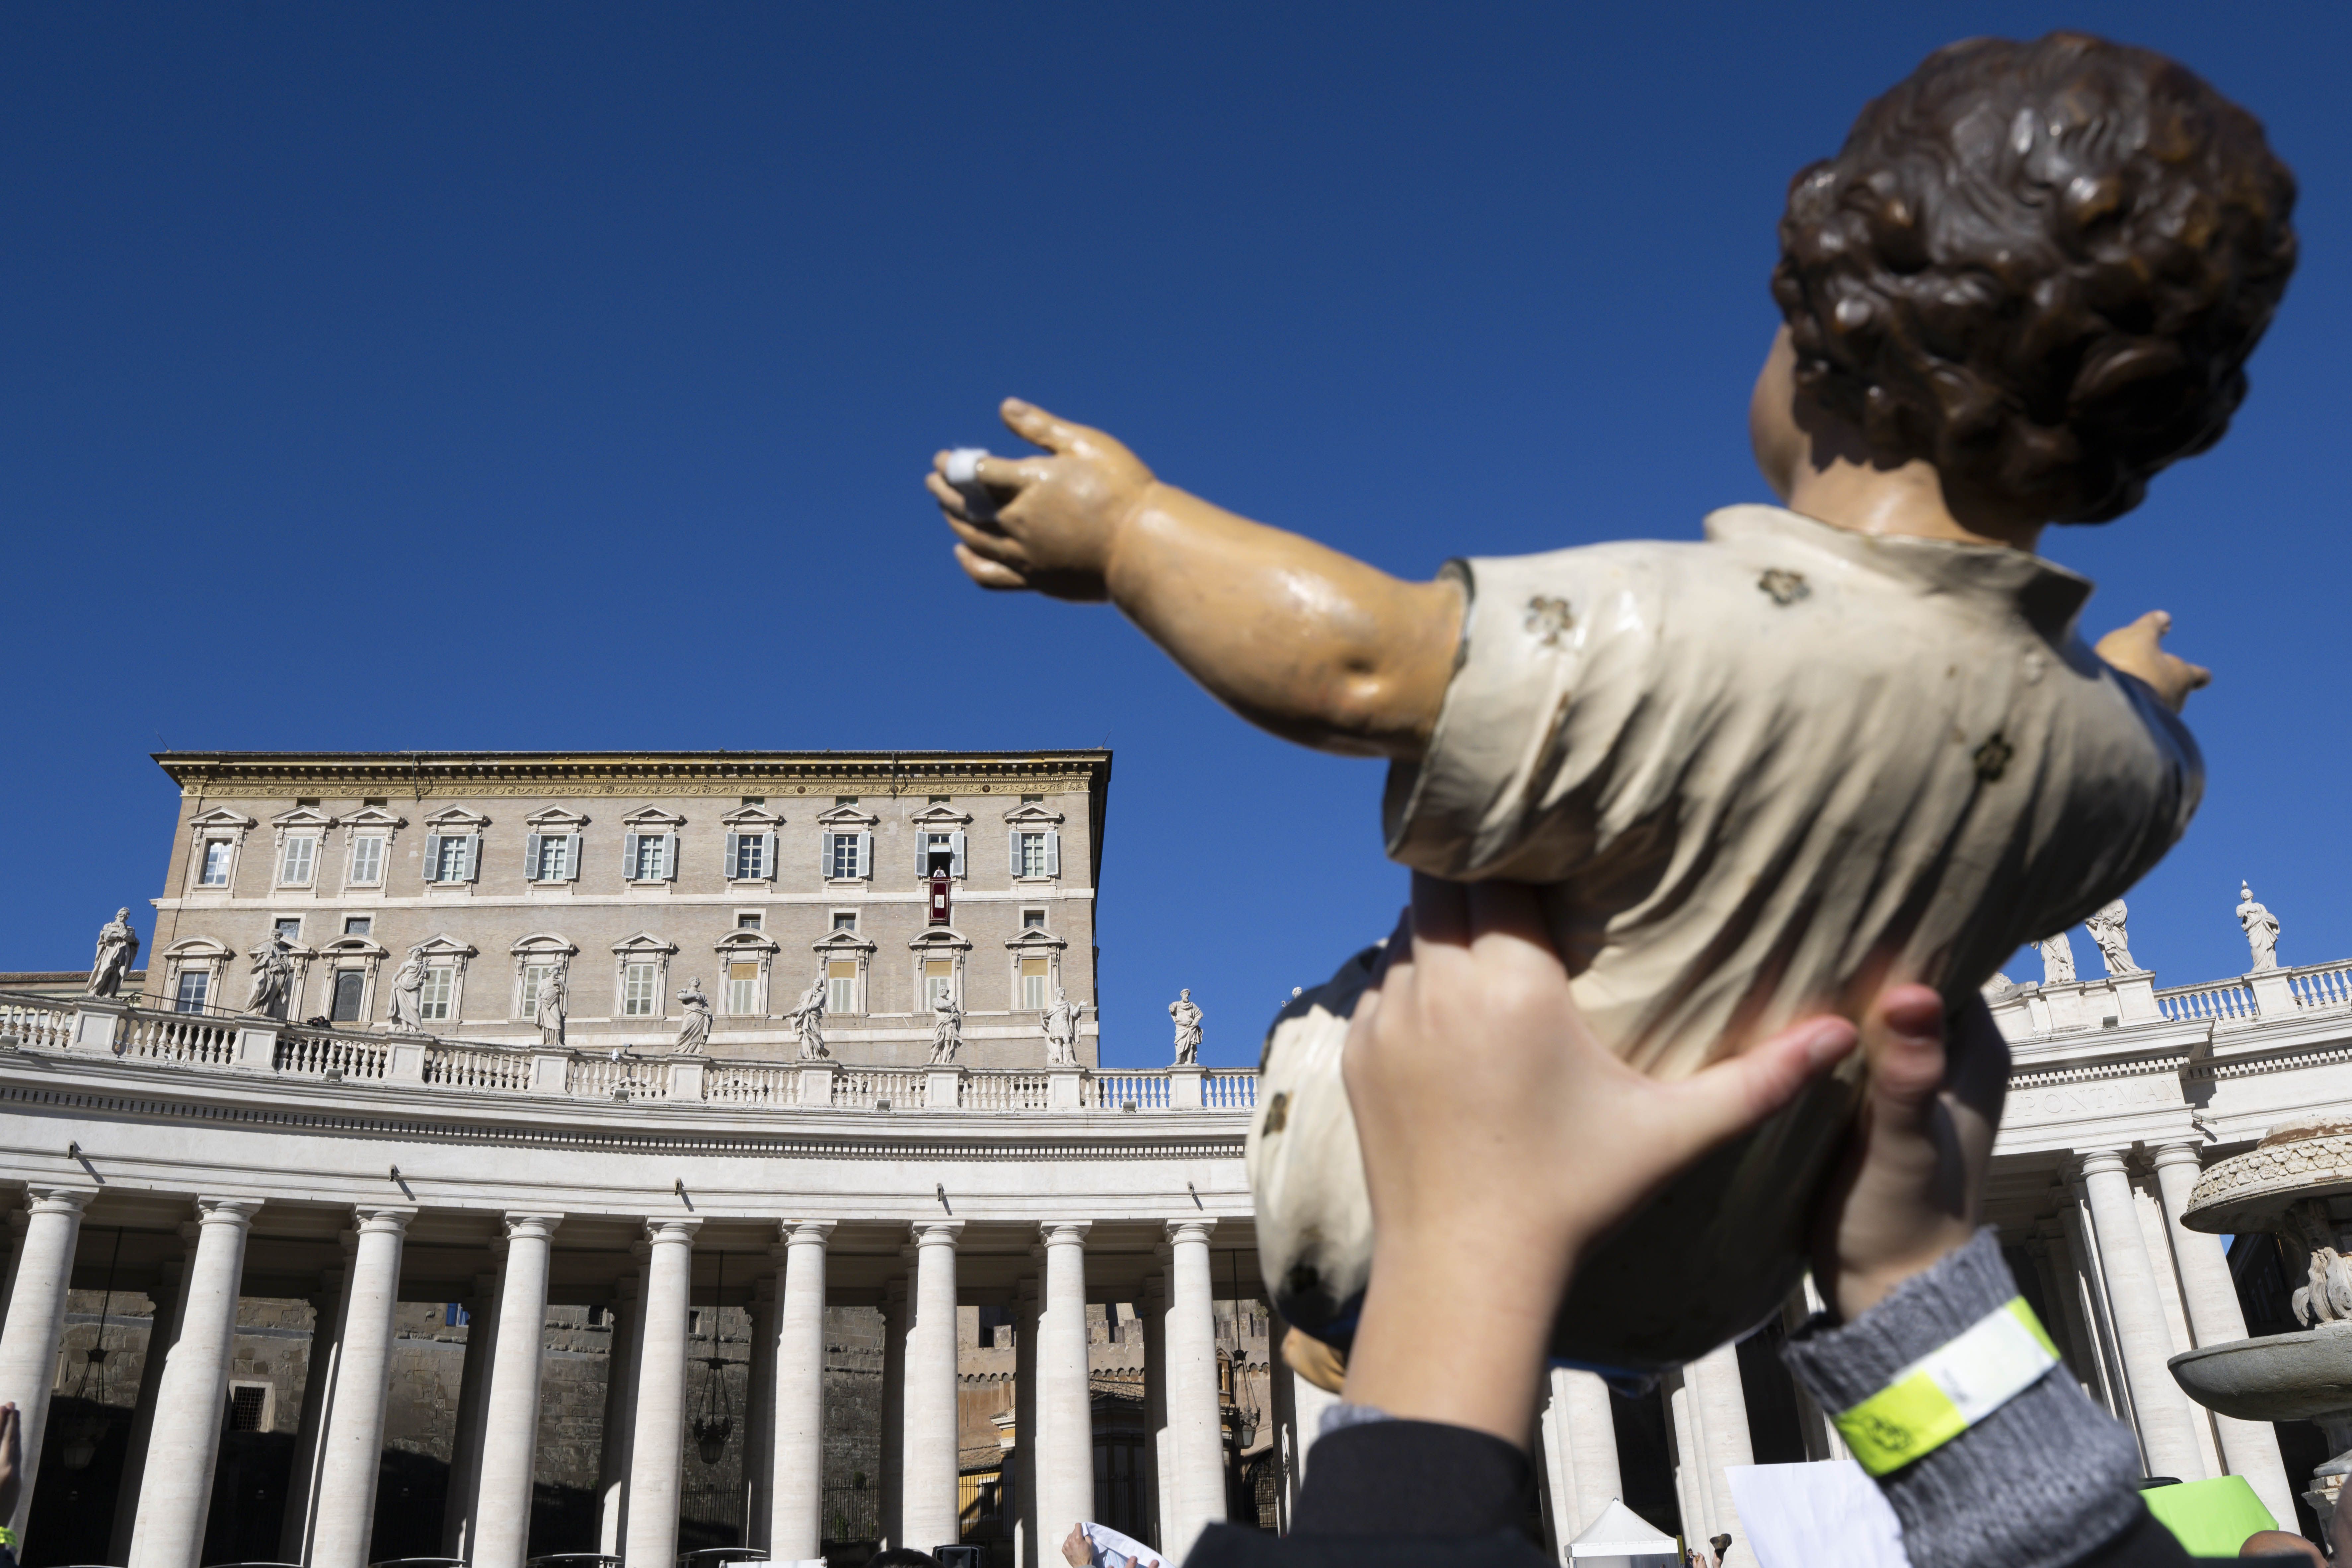 Pope Francis at Sunday Angelus: ‘Only in God do we find the light of life’